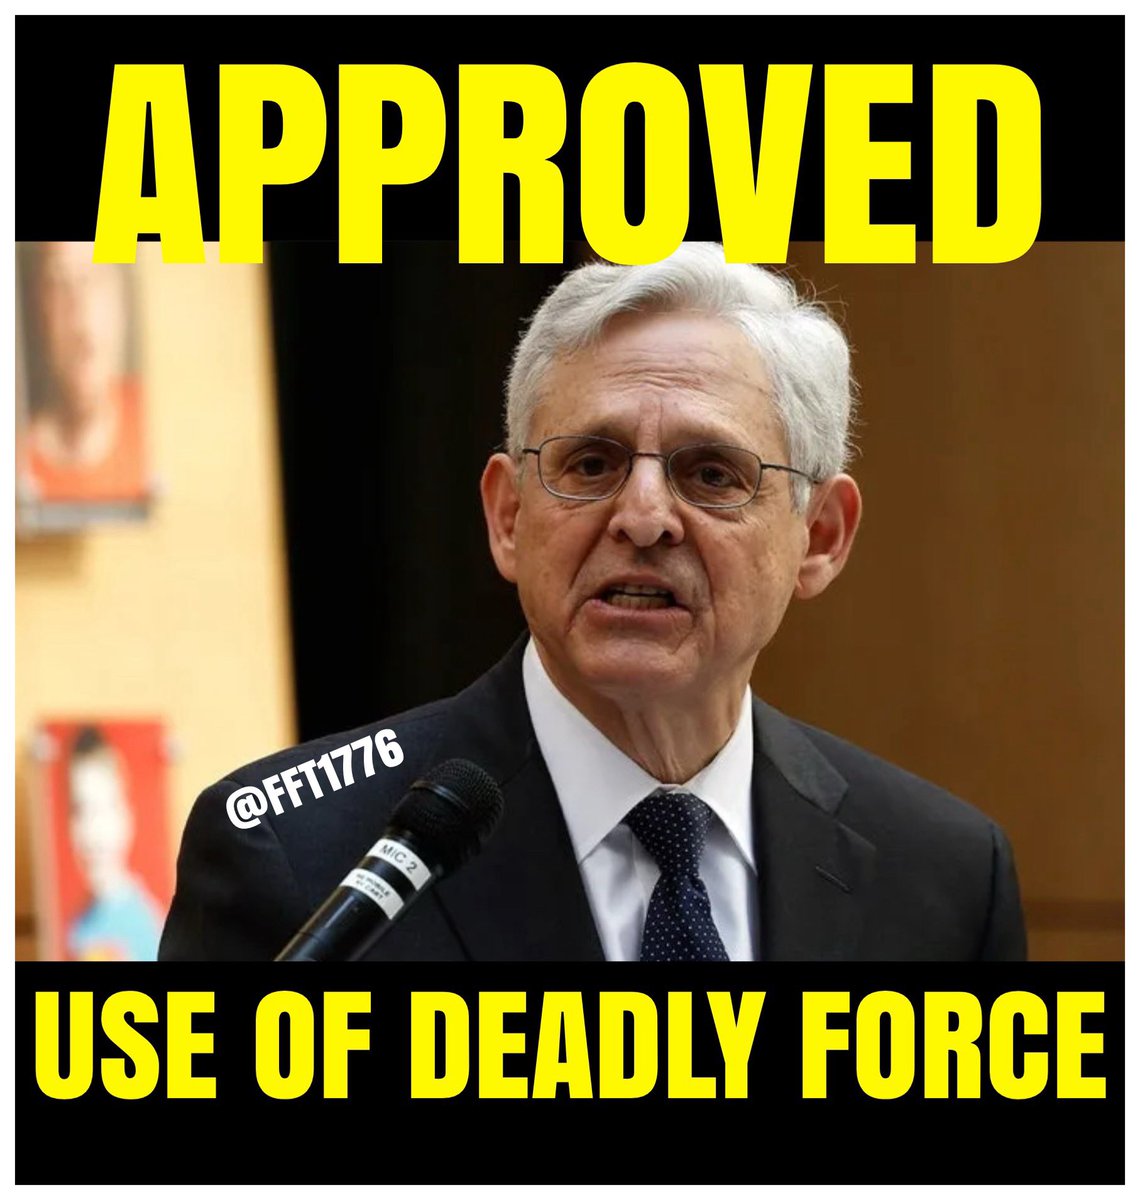 “Merrick Garland” approved the use of deadly force of a former president and leading political opponent. Read that again and again. This is a BIG deal. REPOST.